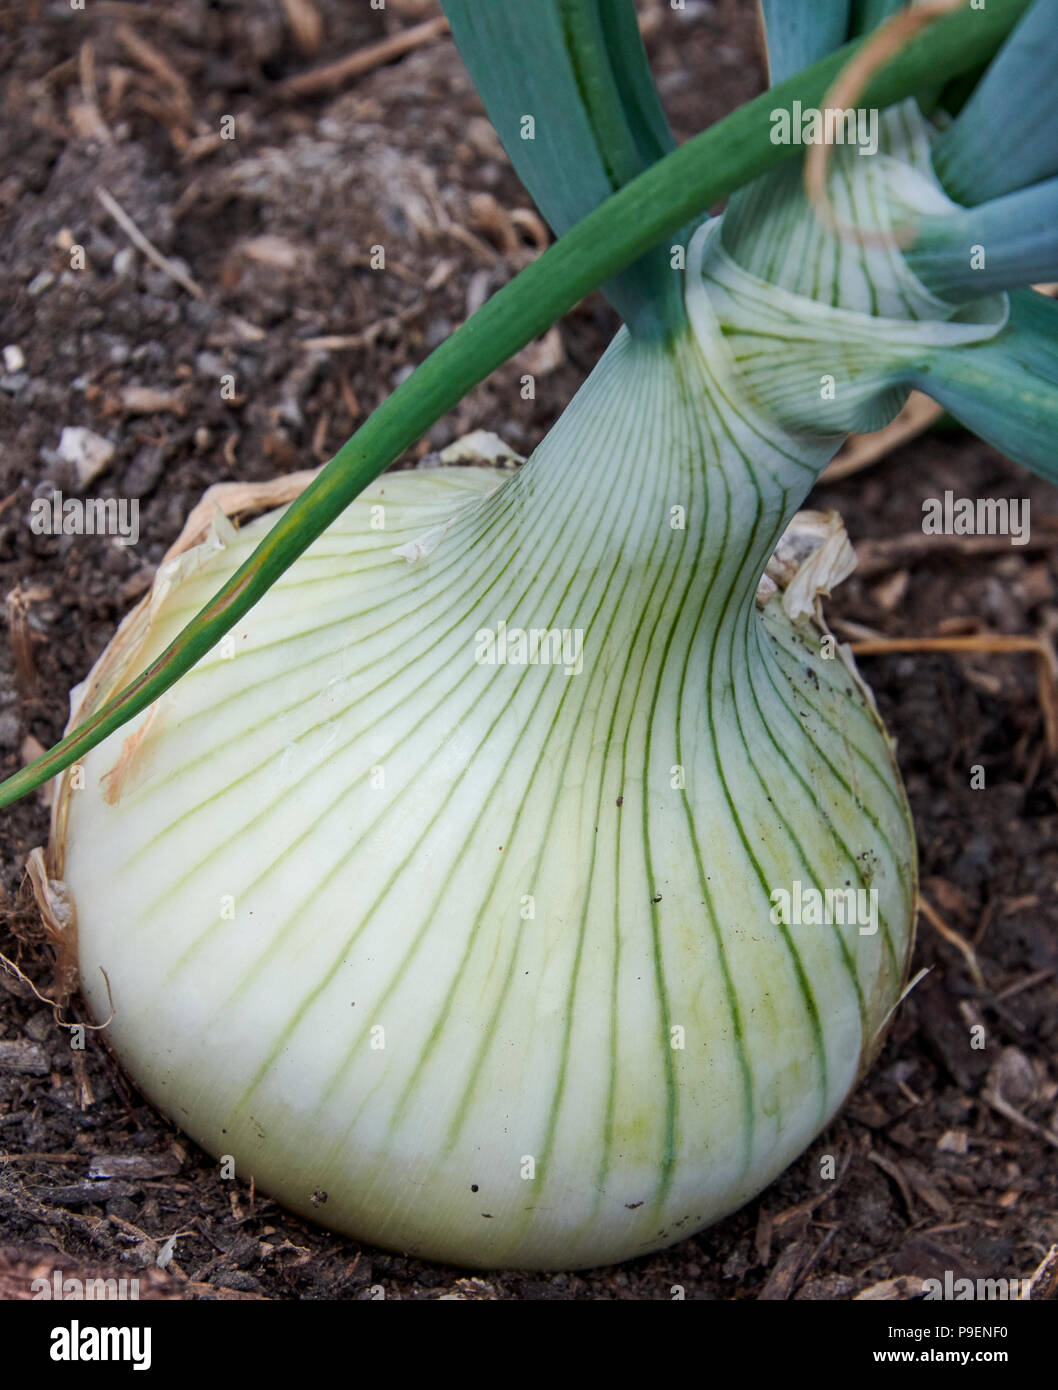 A type of Spanish onion, Ailsa Craig (Allium cepa “Ailsa Craig”) is grown from seed and produces large onions that store and keep well. Stock Photo